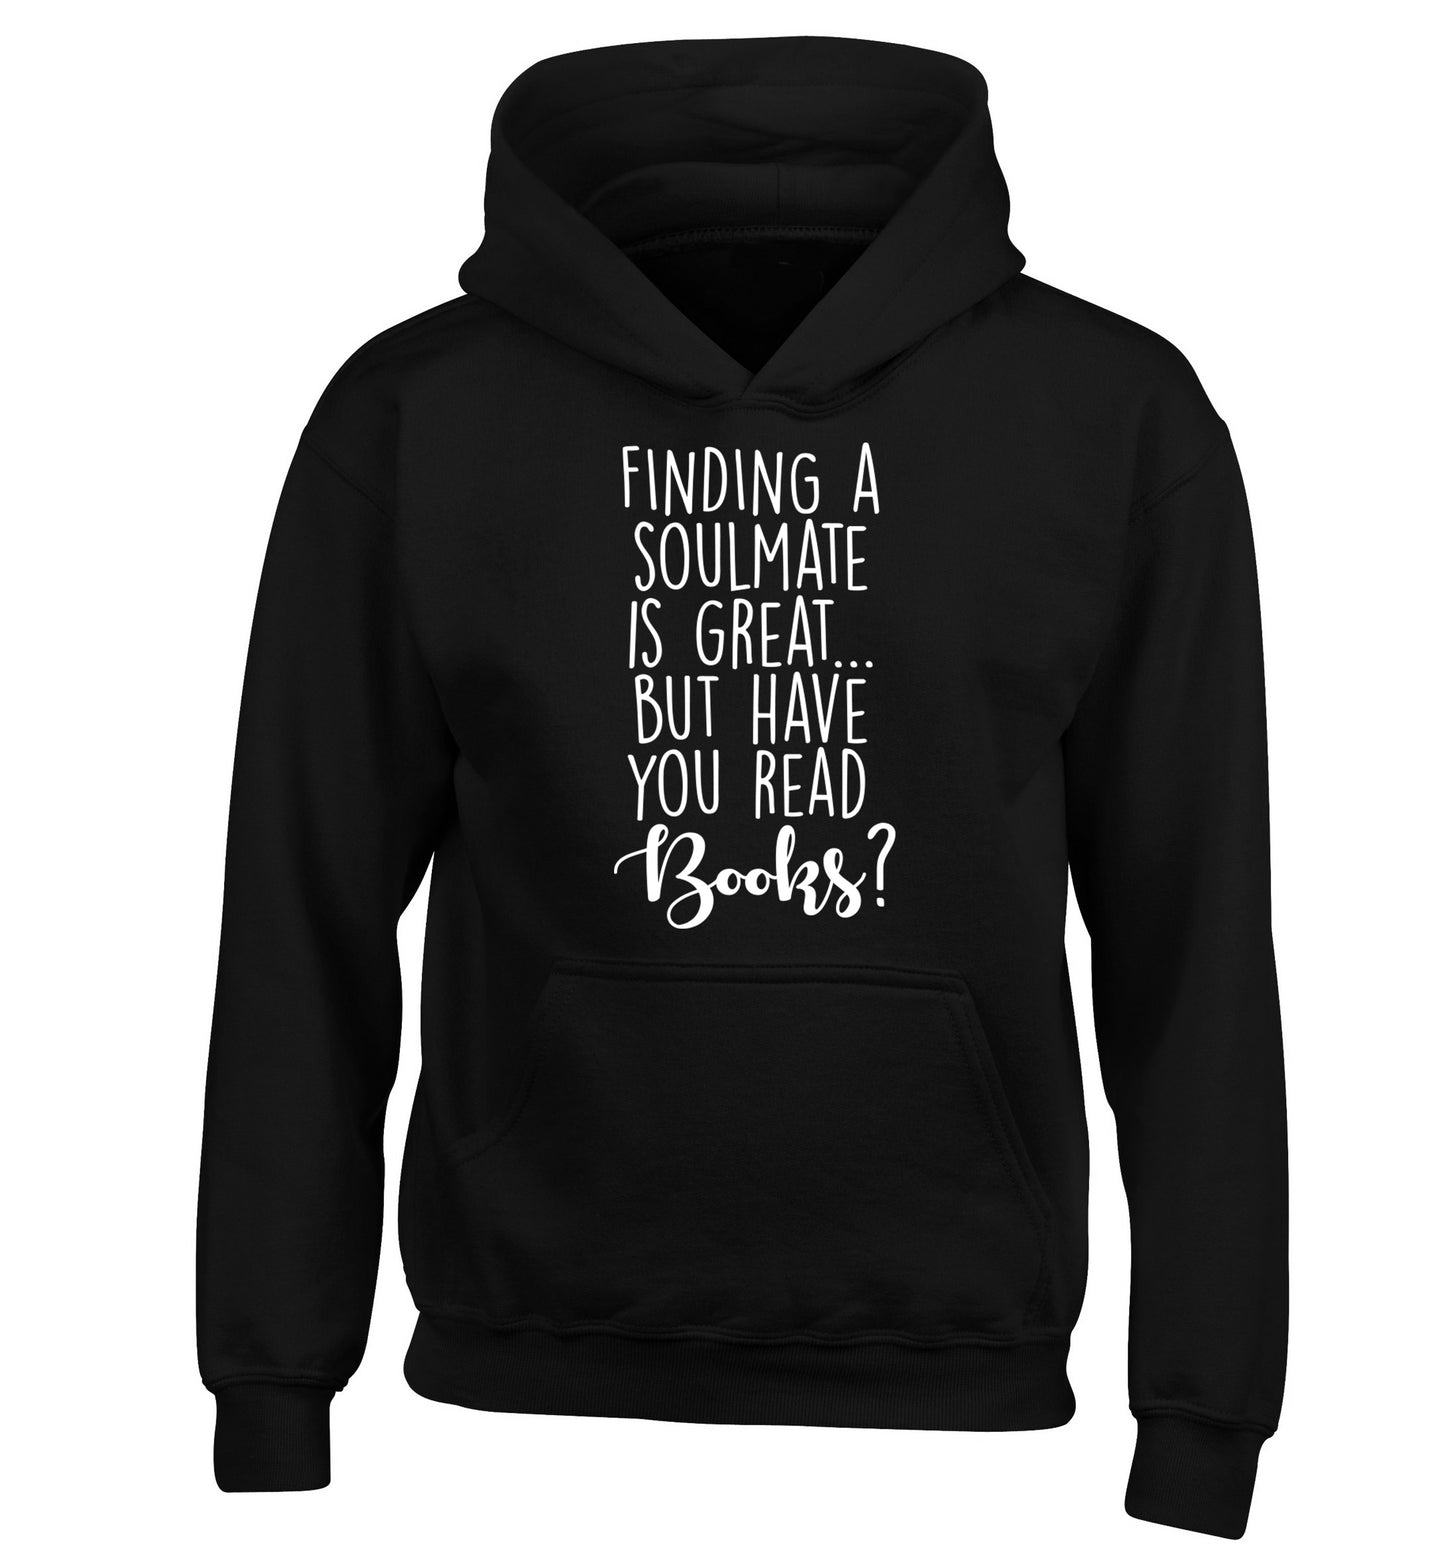 Finding a soulmate is great but have you read books? children's black hoodie 12-13 Years